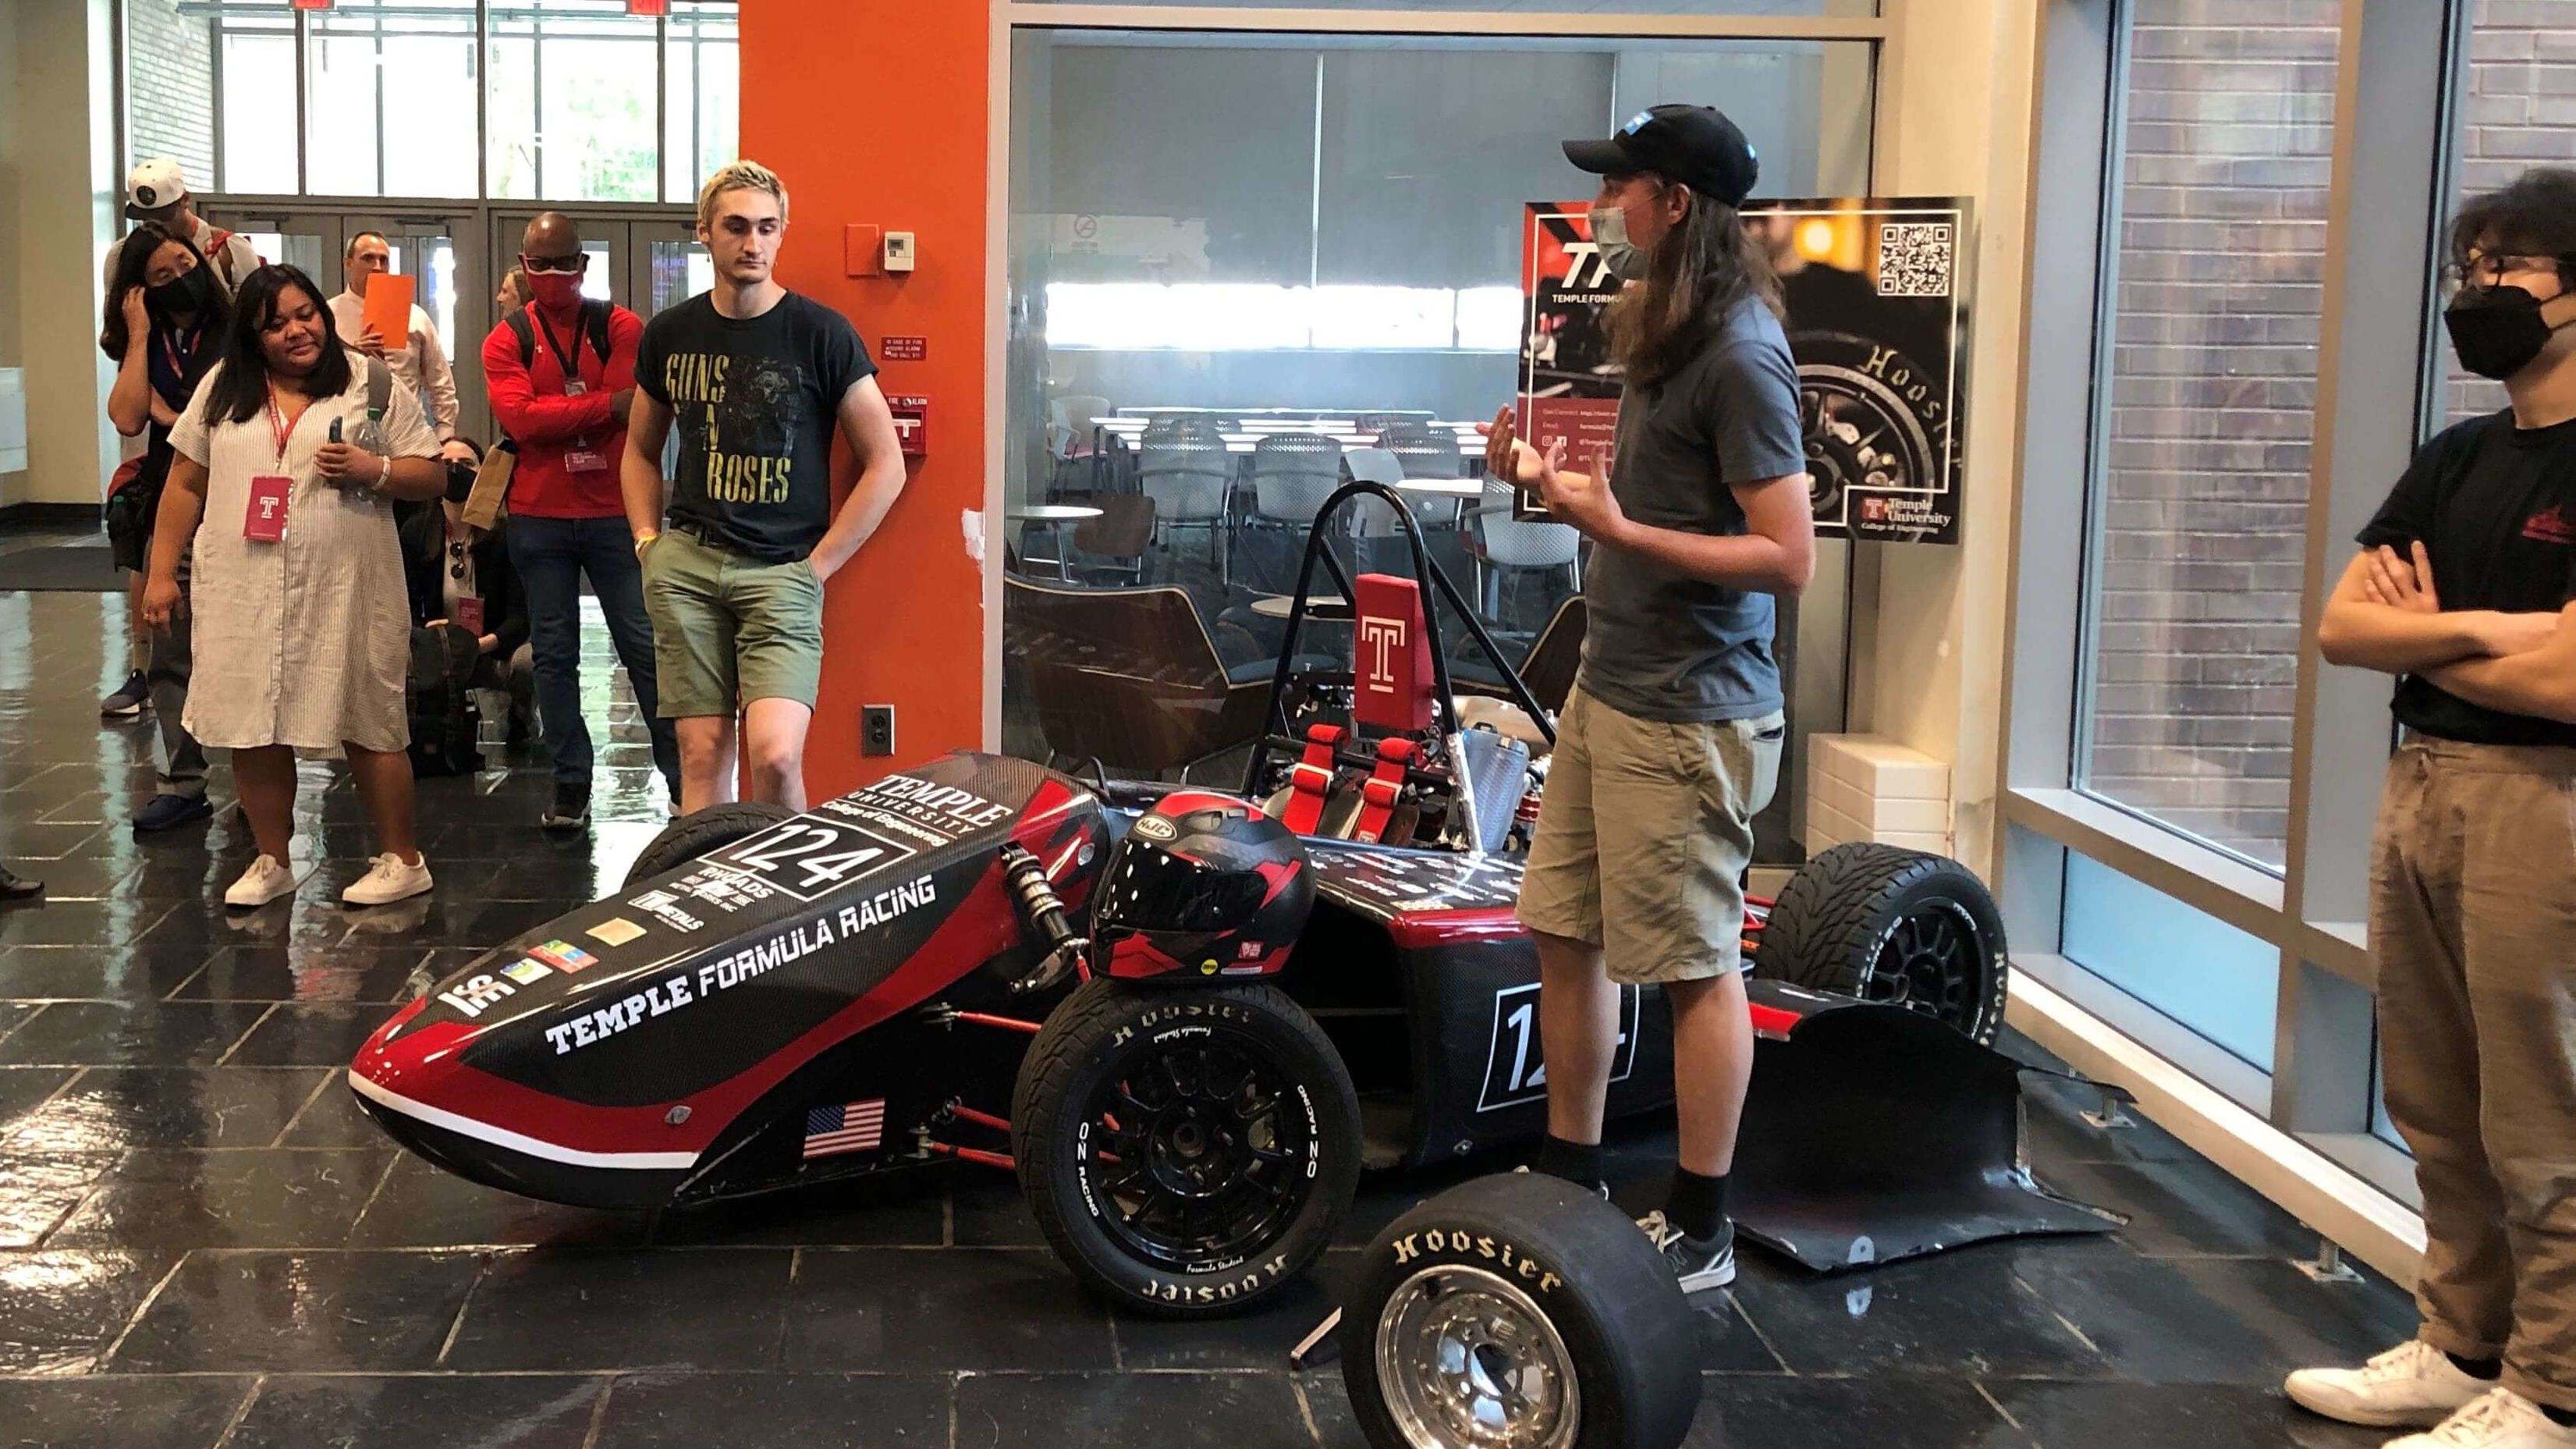 Image of Temple Formula Racing students showing others their 2018 race car.